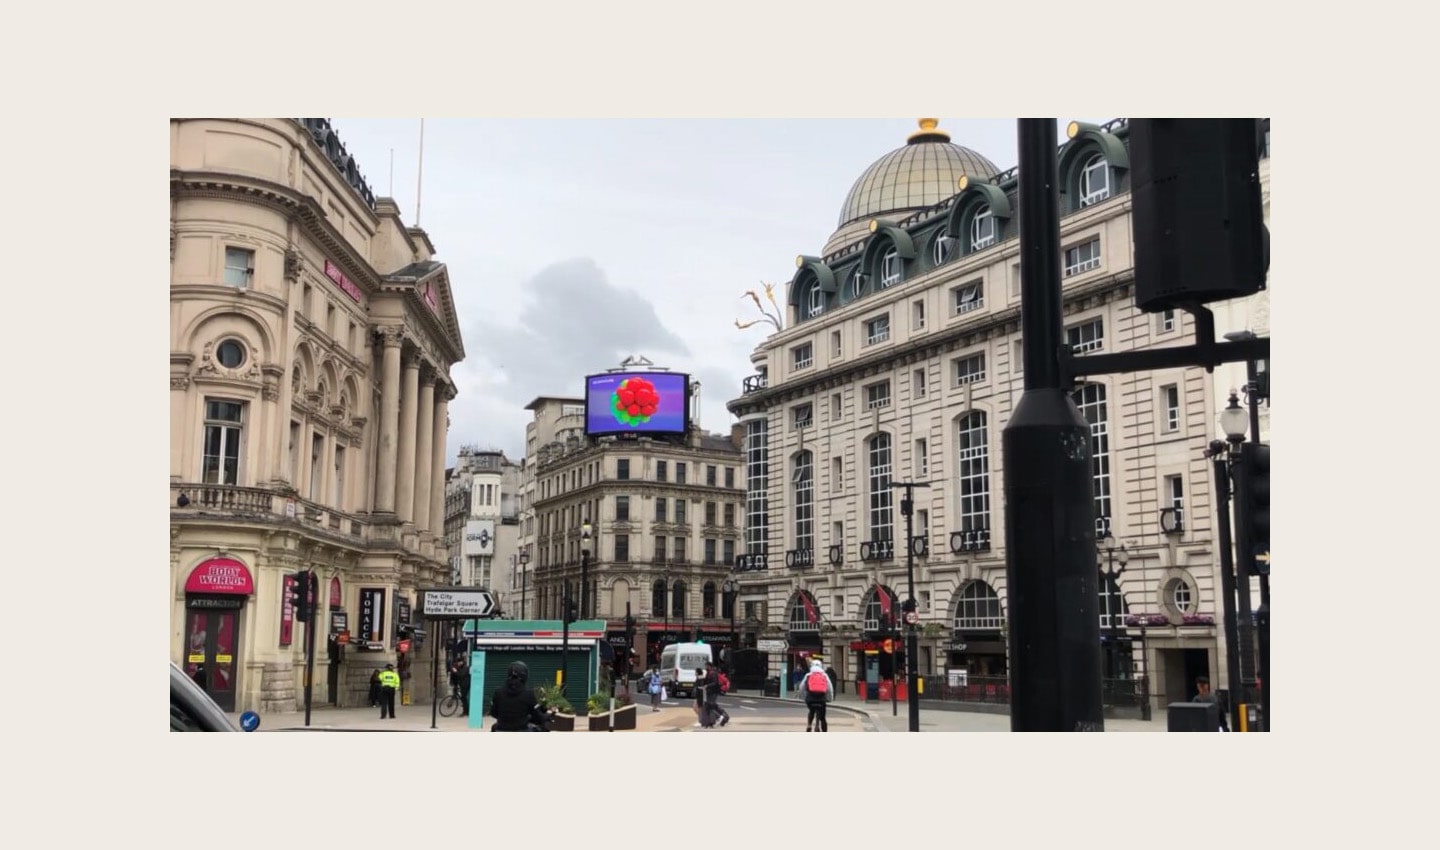 LG's digital billboard in Piccadilly Circus, London displaying an animation representing the function of LG SIGNATURE Wine Cellar